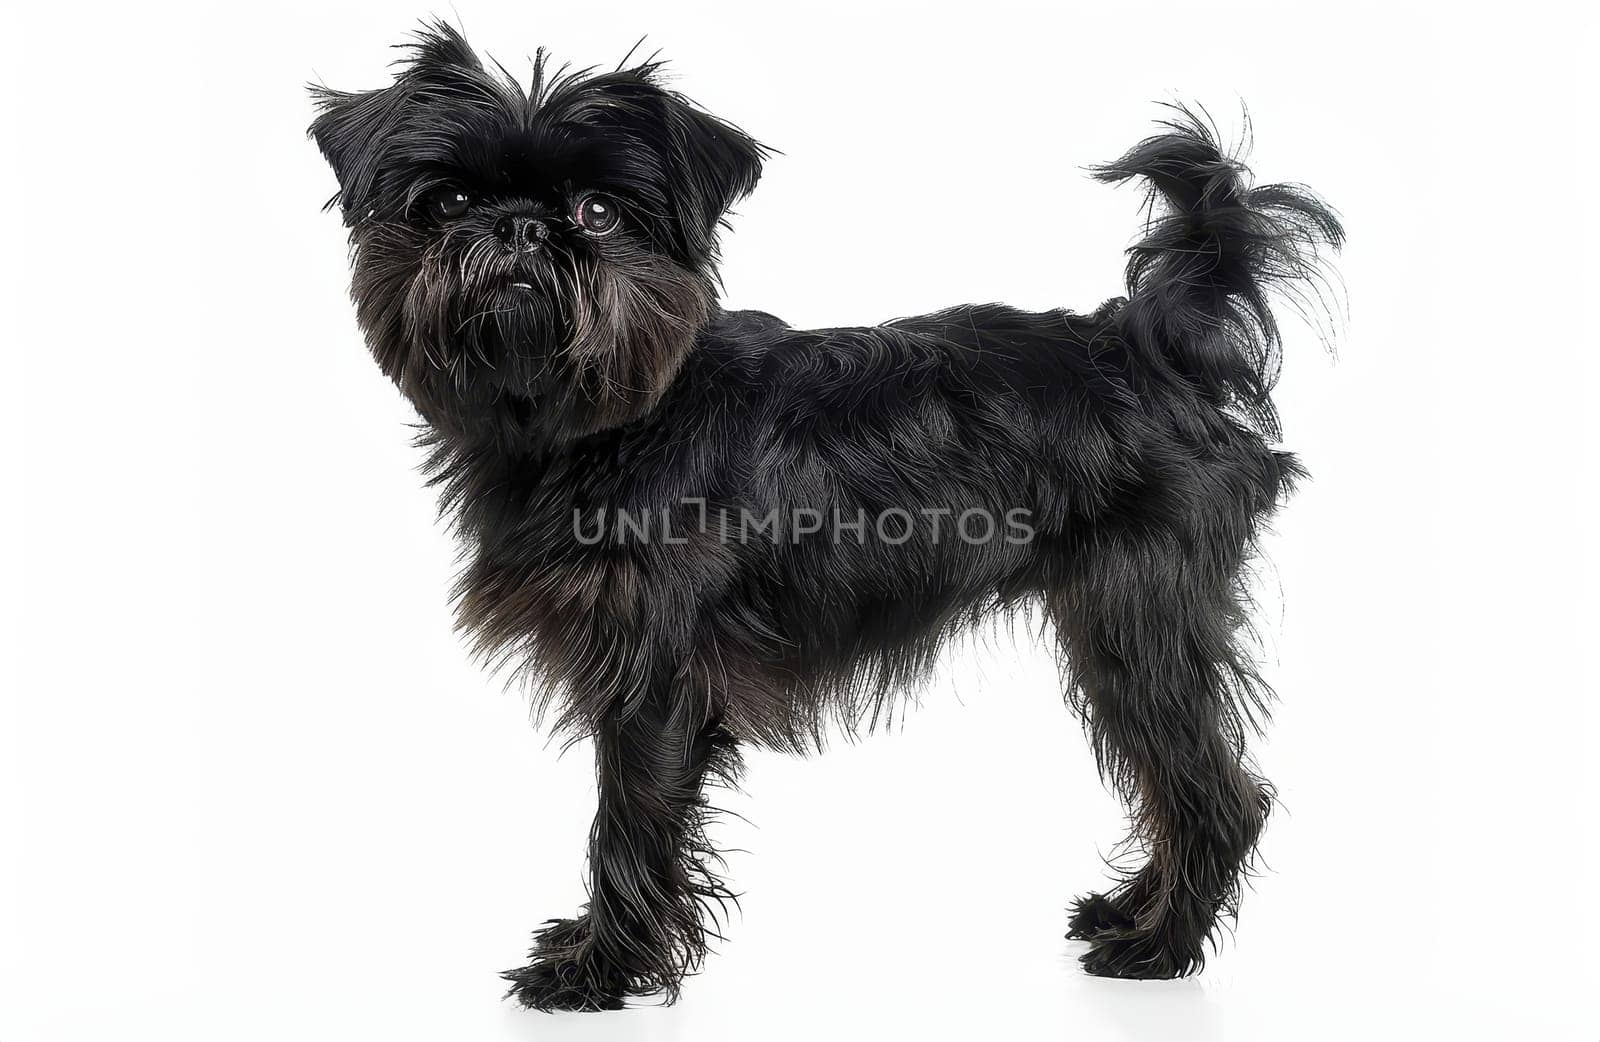 This image captures a playful Affenpinscher standing, its coat flowing and tail whimsically curled. The dog's lively spirit and compact stature are prominently displayed. by sfinks